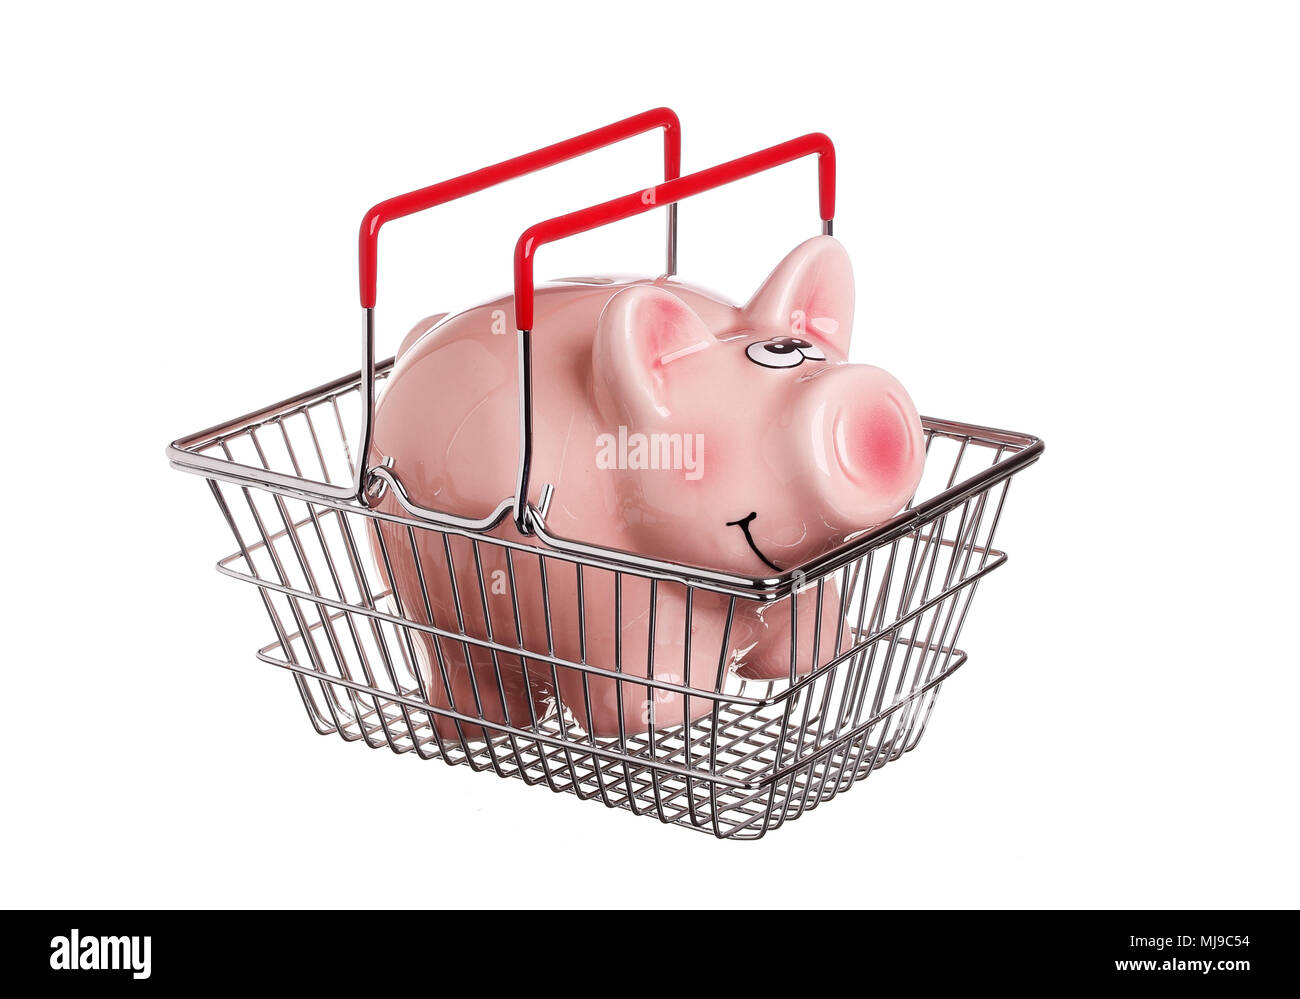 One piggy bank in a shopping basket with red handles, isolated on white. Stock Photo